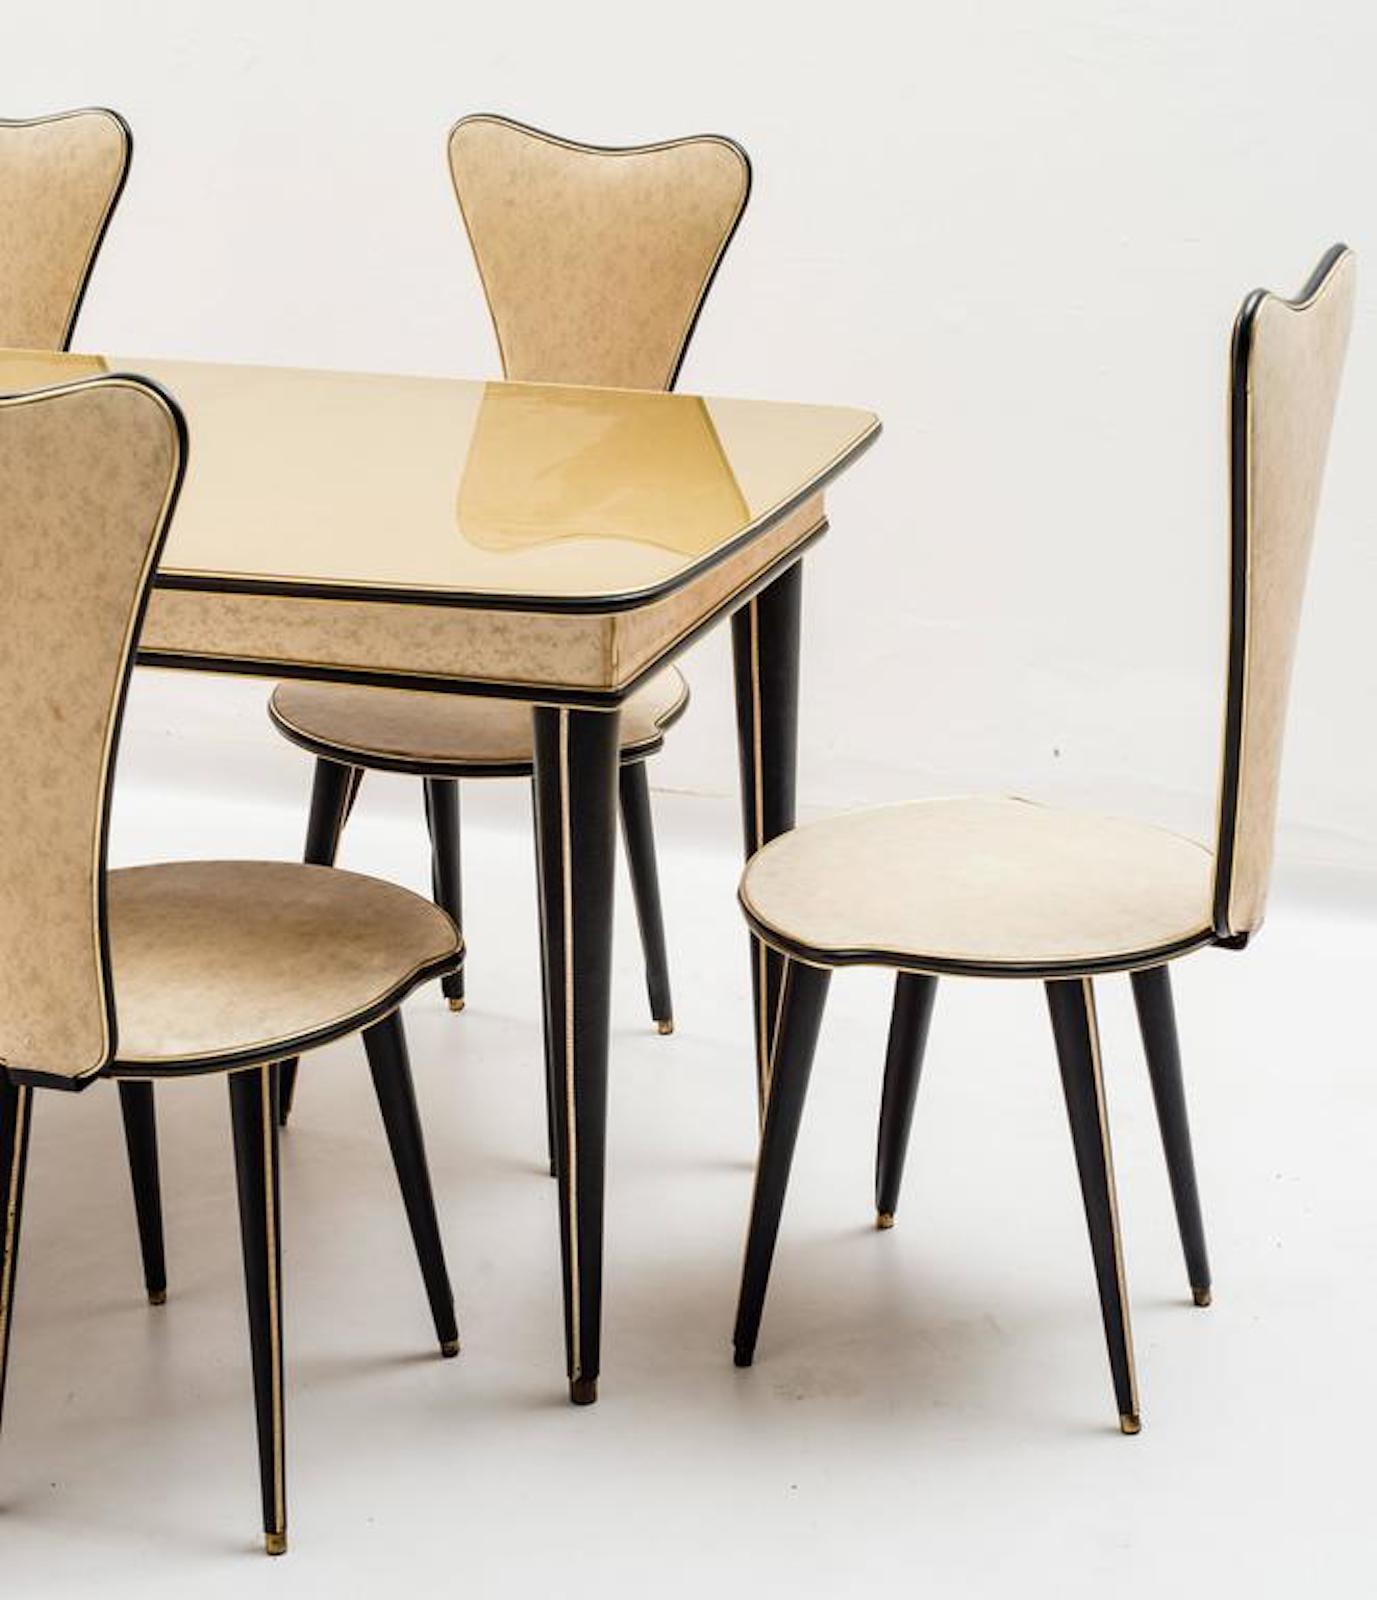 Set of Six Chairs by Umberto Mascagni, 1950s For Sale 8